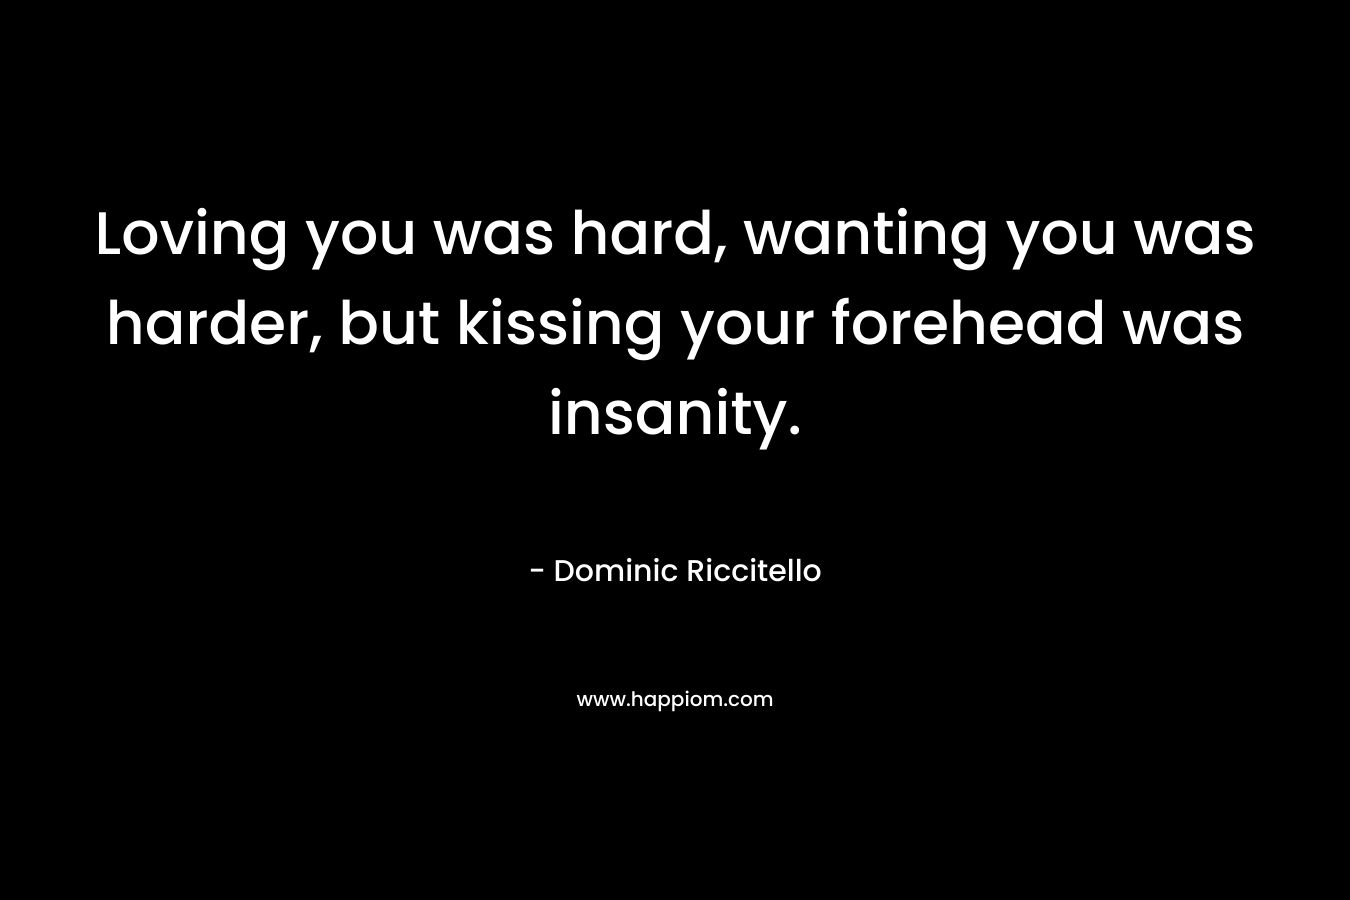 Loving you was hard, wanting you was harder, but kissing your forehead was insanity.